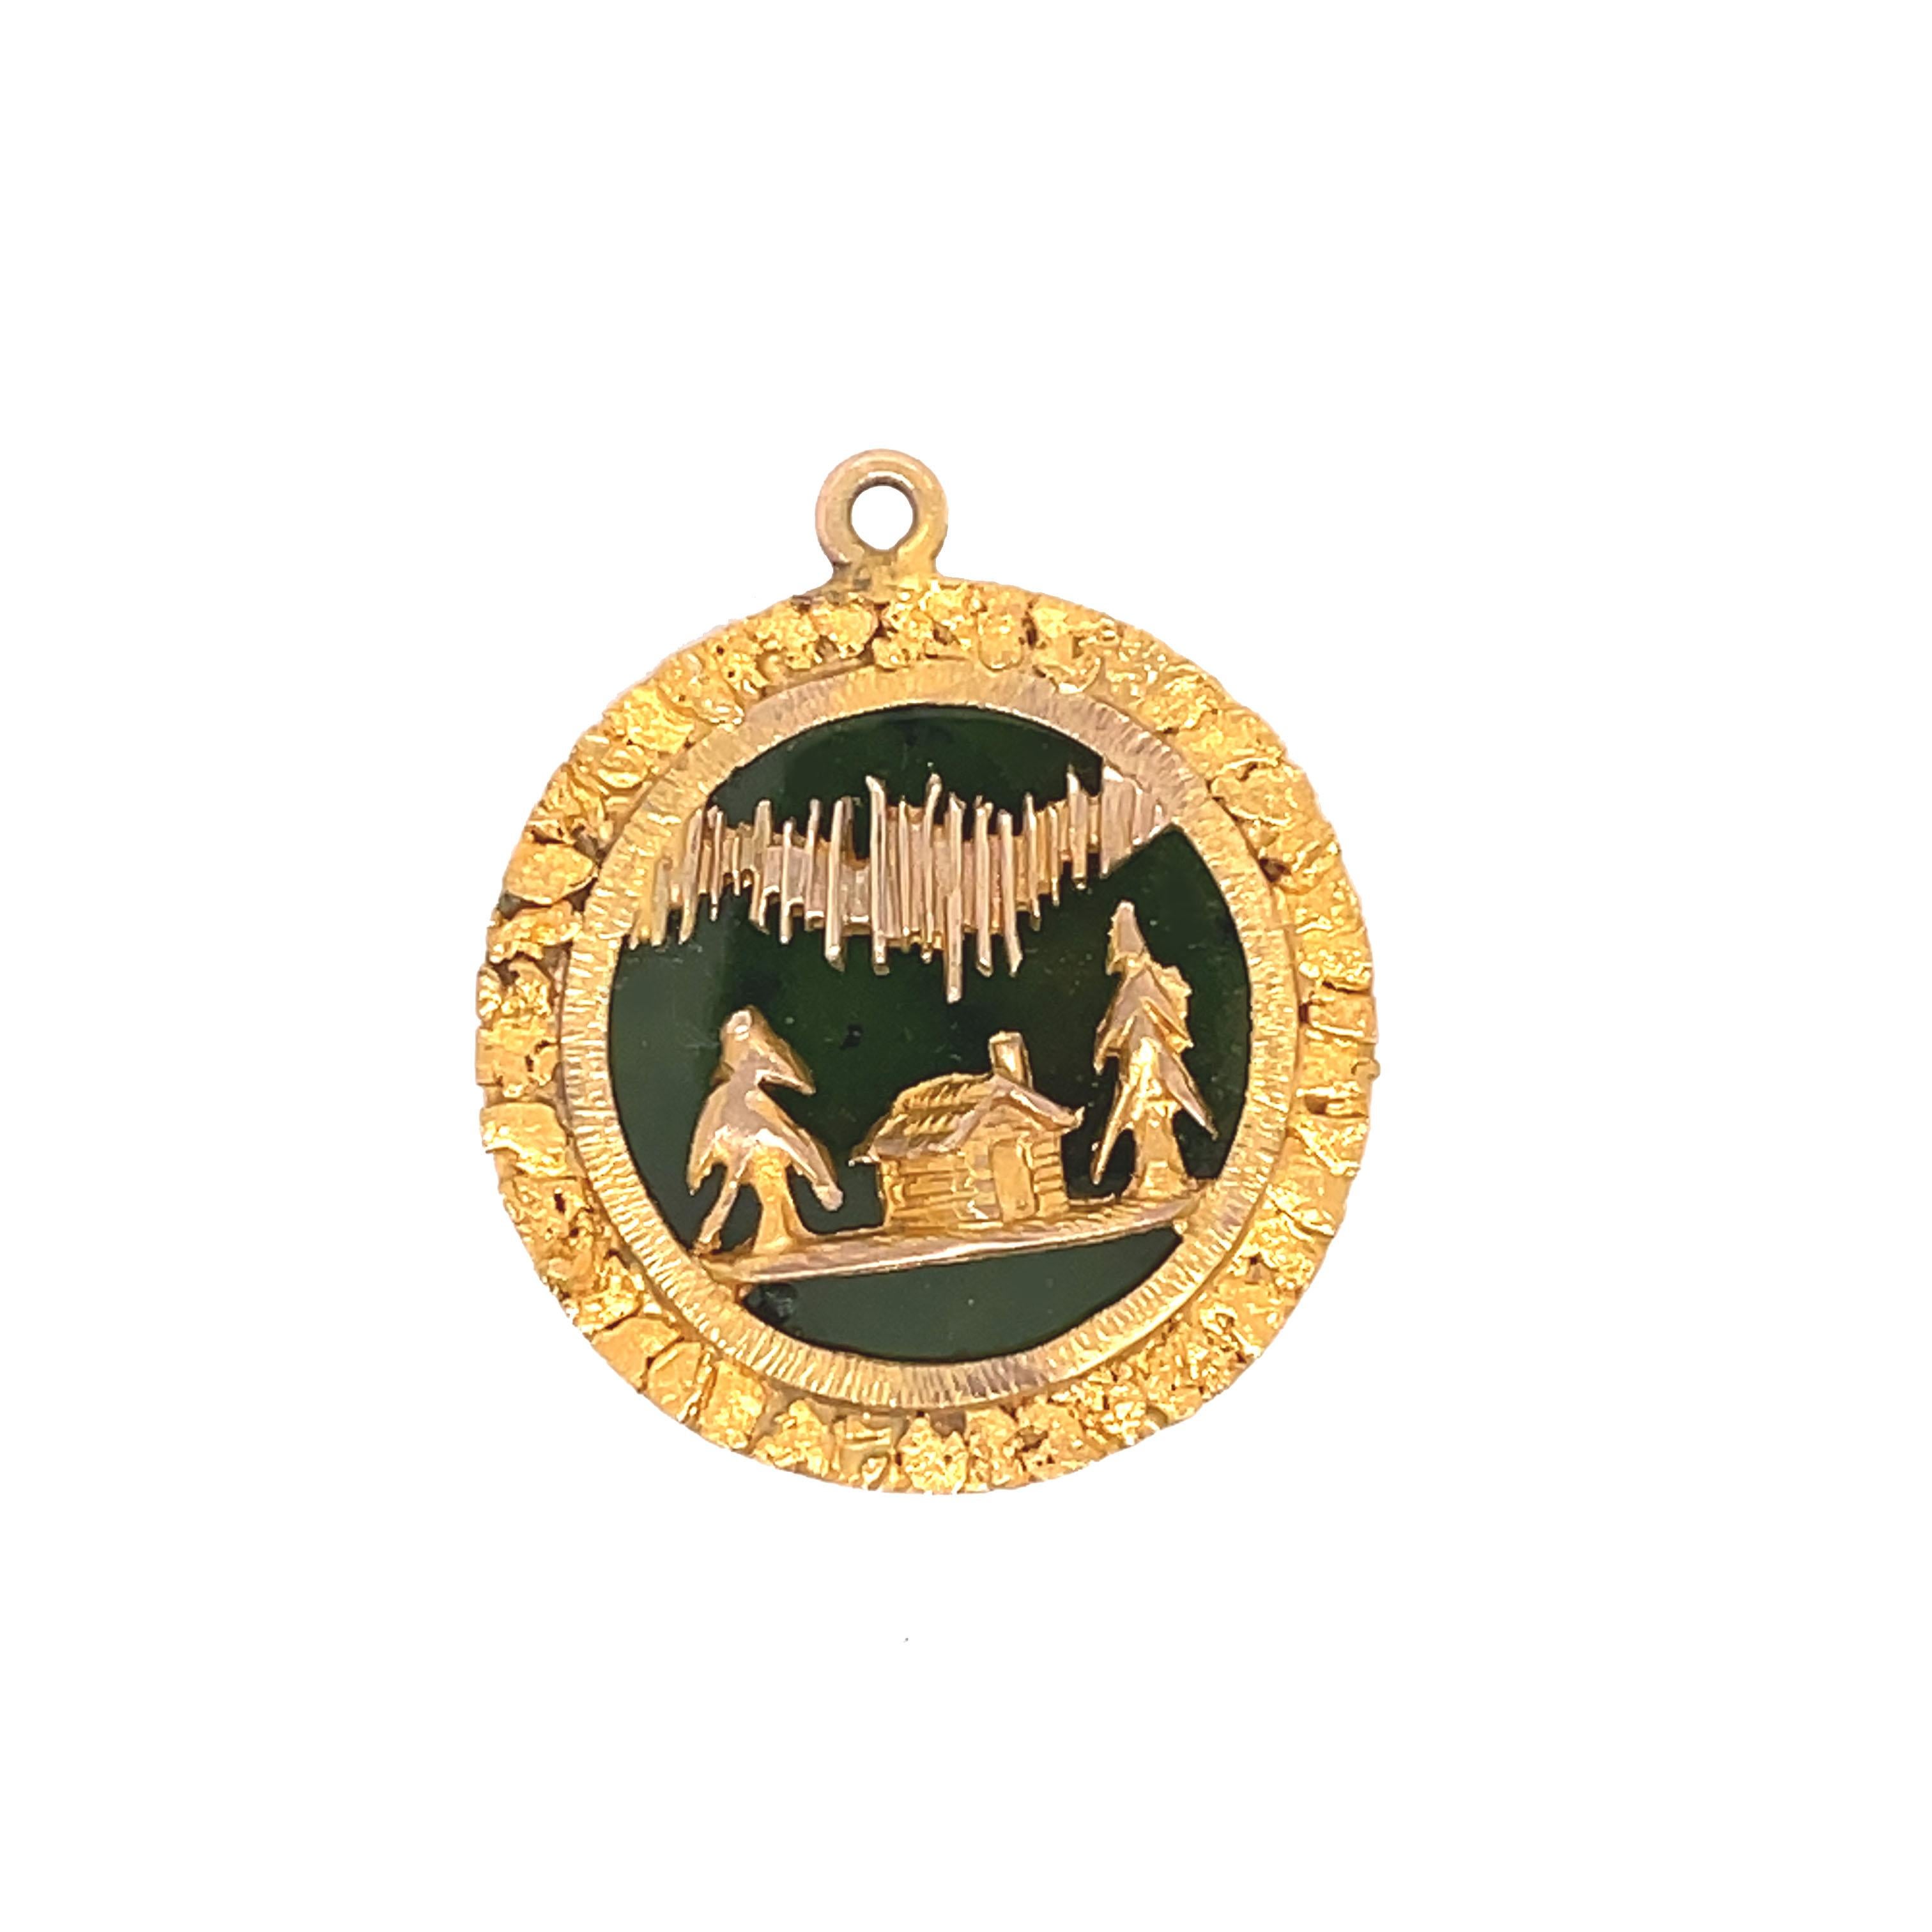 This is a spectacular 10K yellow gold Art Deco pendant depicting a serene image of a cabin in the woods with a rich green jade background. This pendant would make an excellent gift for the nature lover or adventure seeker in your life! The beautiful